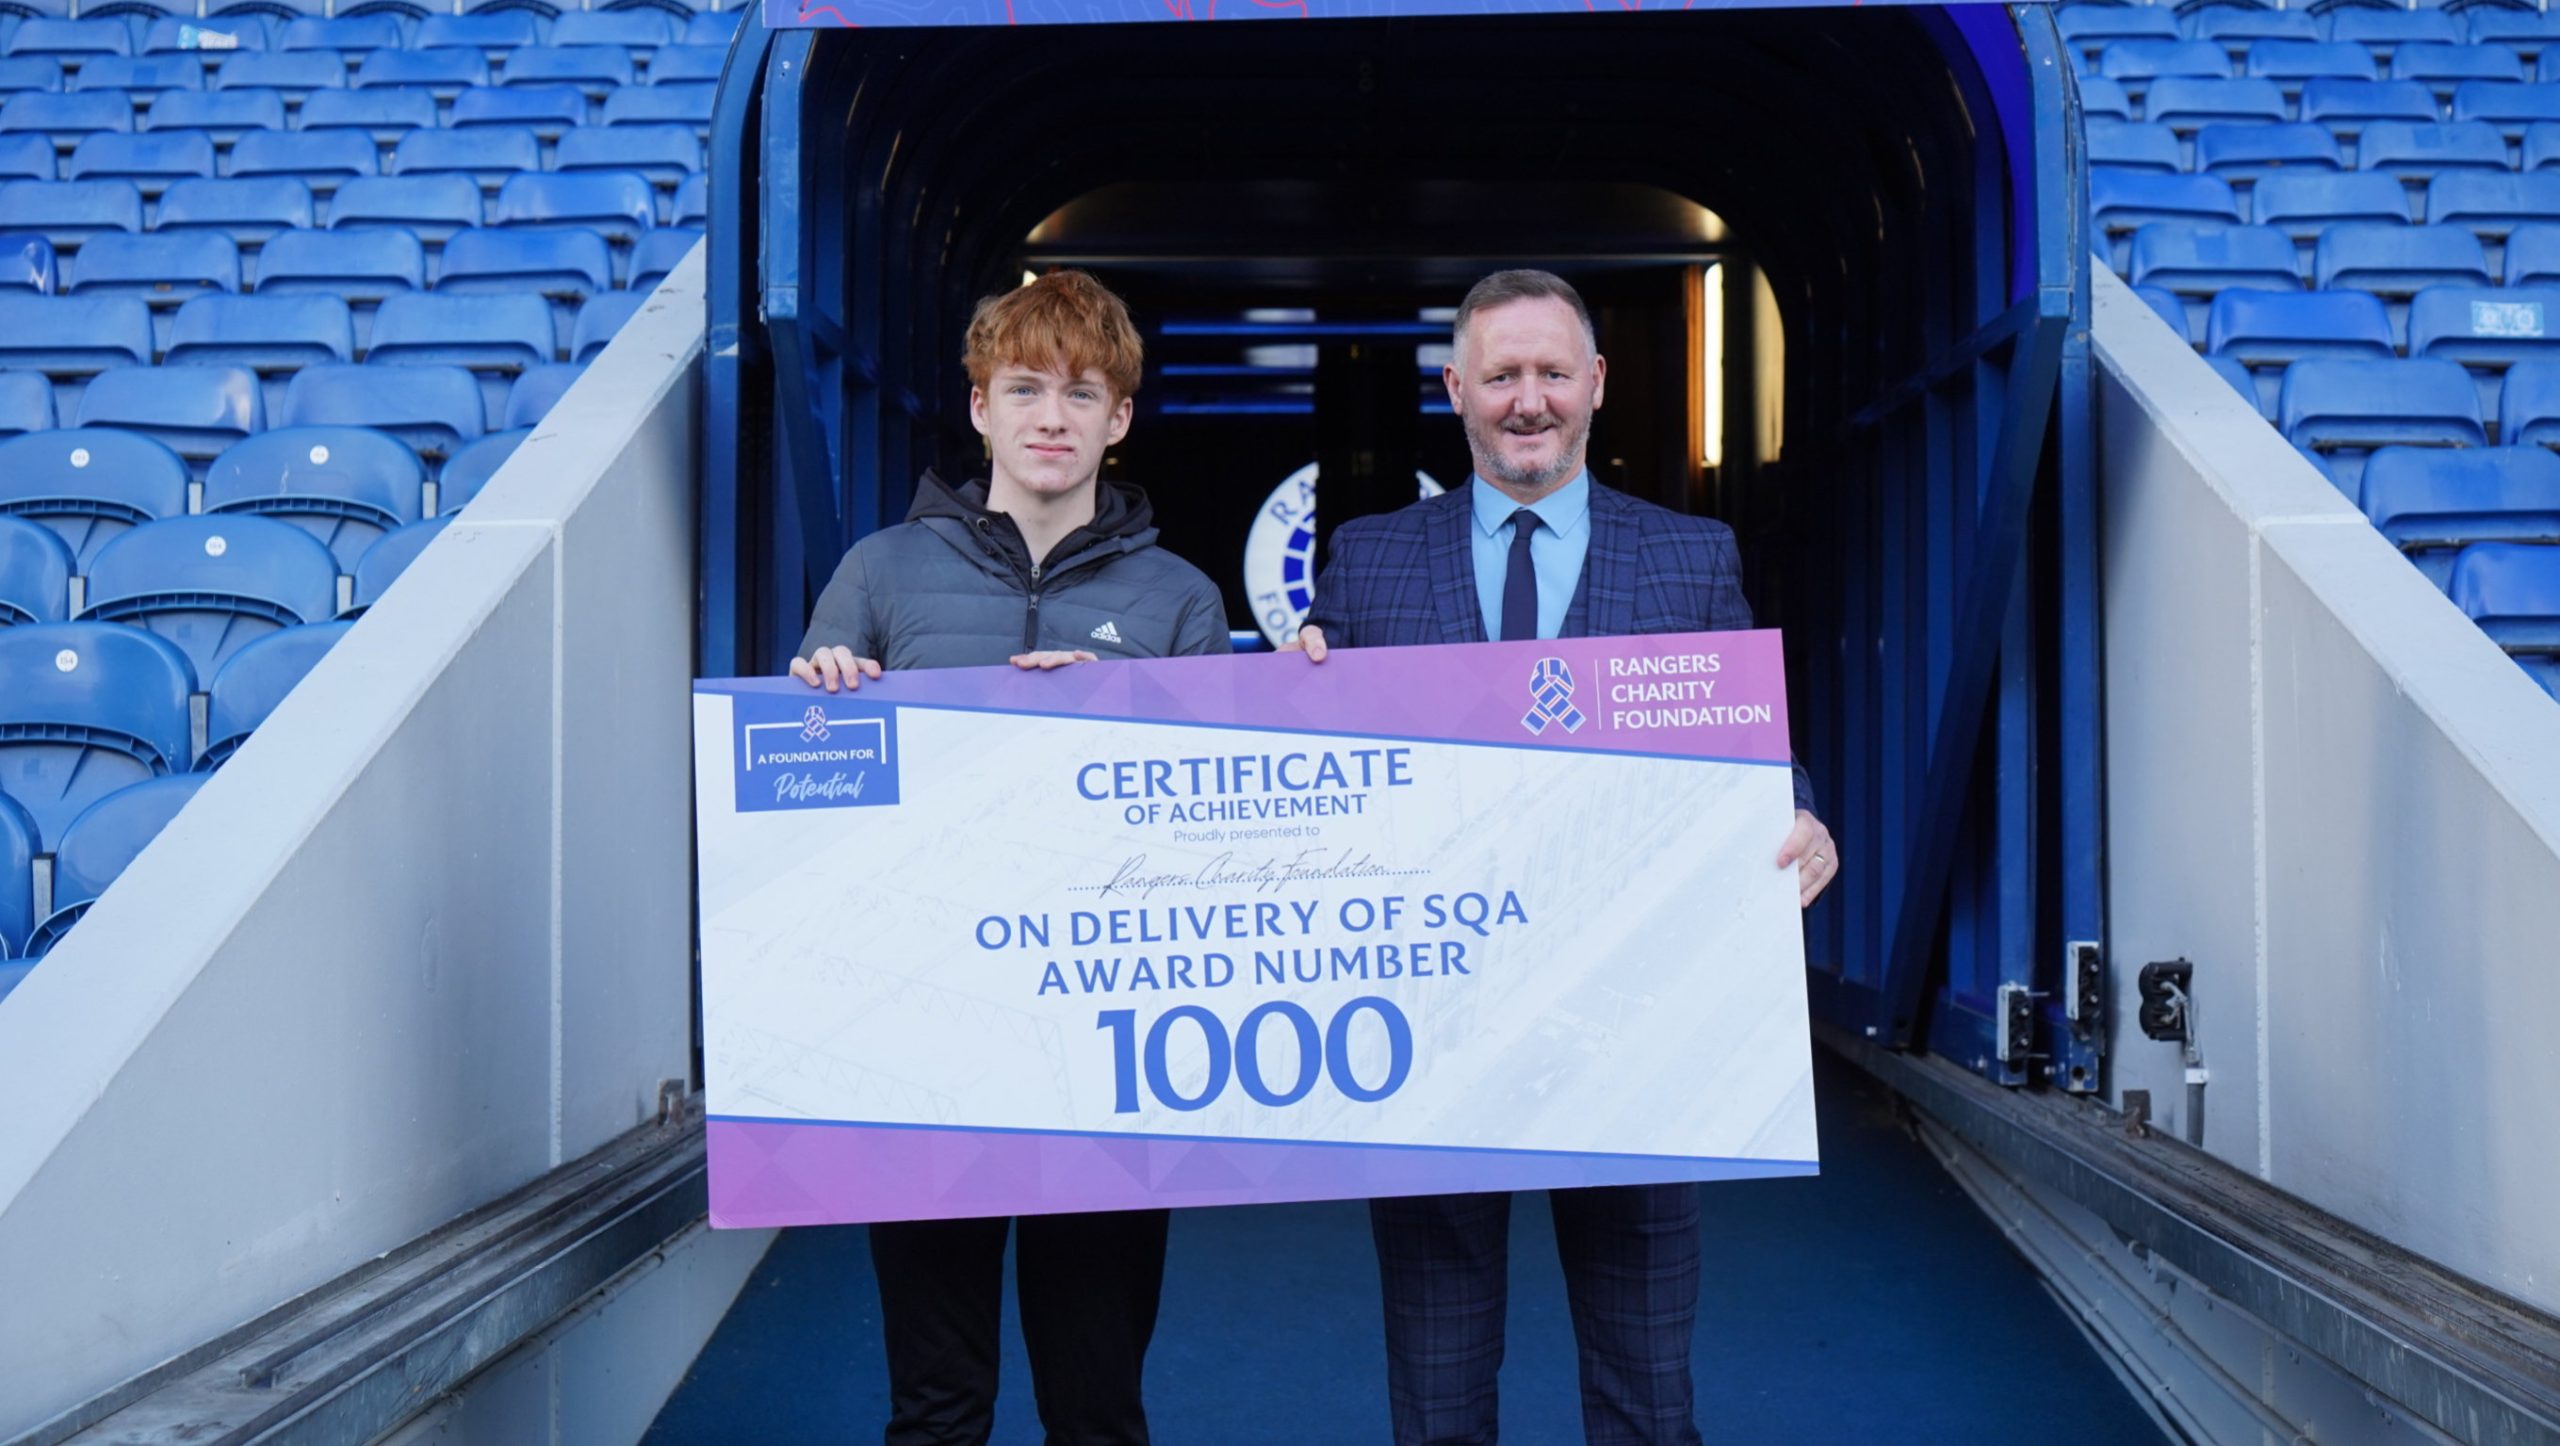 1,000 And Counting: Rangers Charity Foundation Reaches Milestone SQA Award